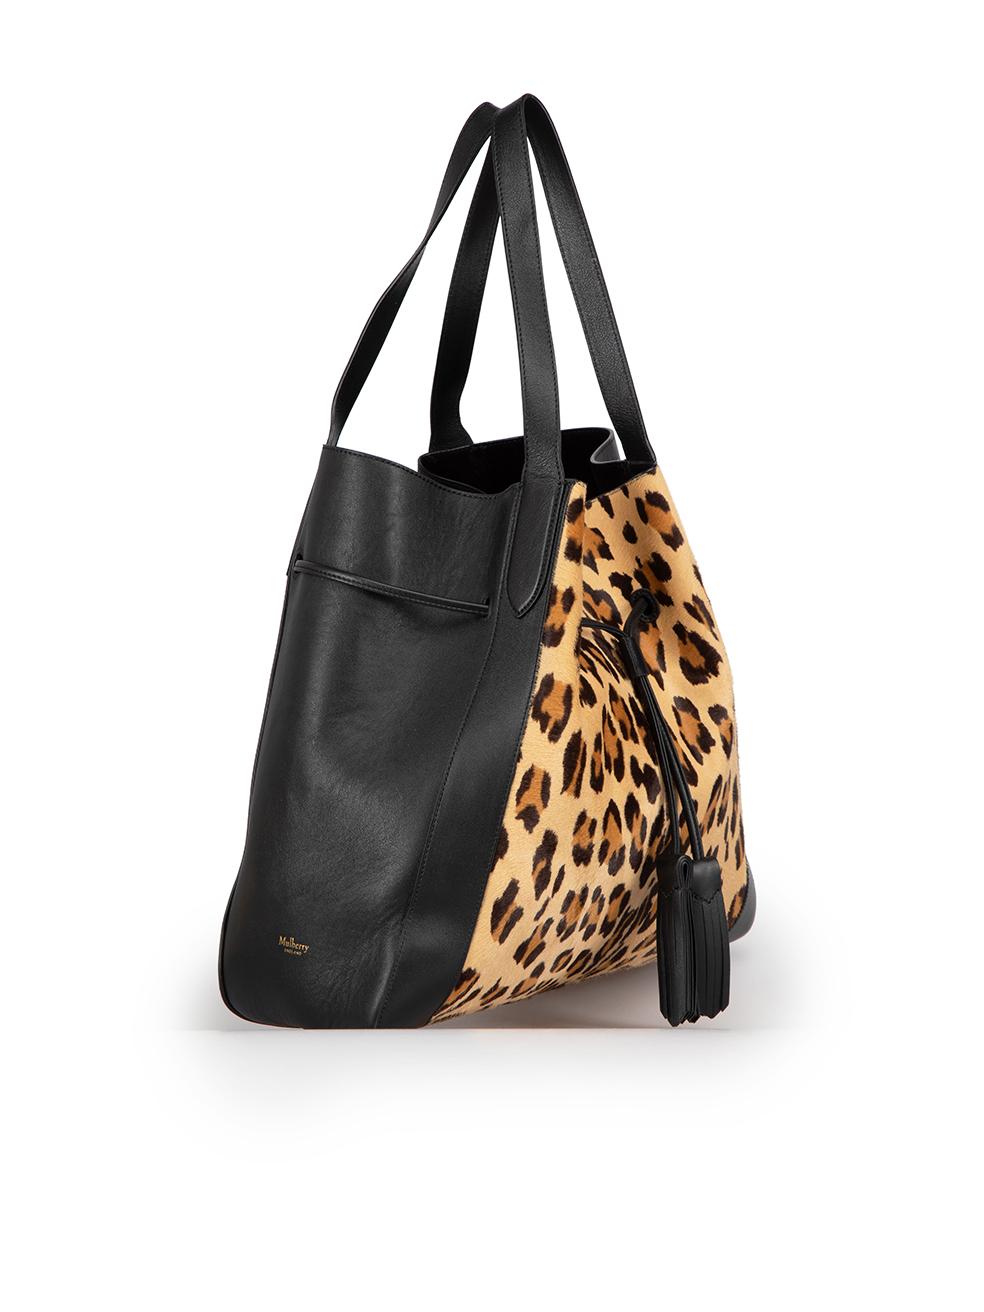 CONDITION is Very good. Minimal wear to bag is evident. Minimal wear to the rear with very light abrasion to the leather on this used Mulberry designer resale item.
 
Details
Millie
Black
Calf leather
Large tote bag
Brown ponyhair leopard print